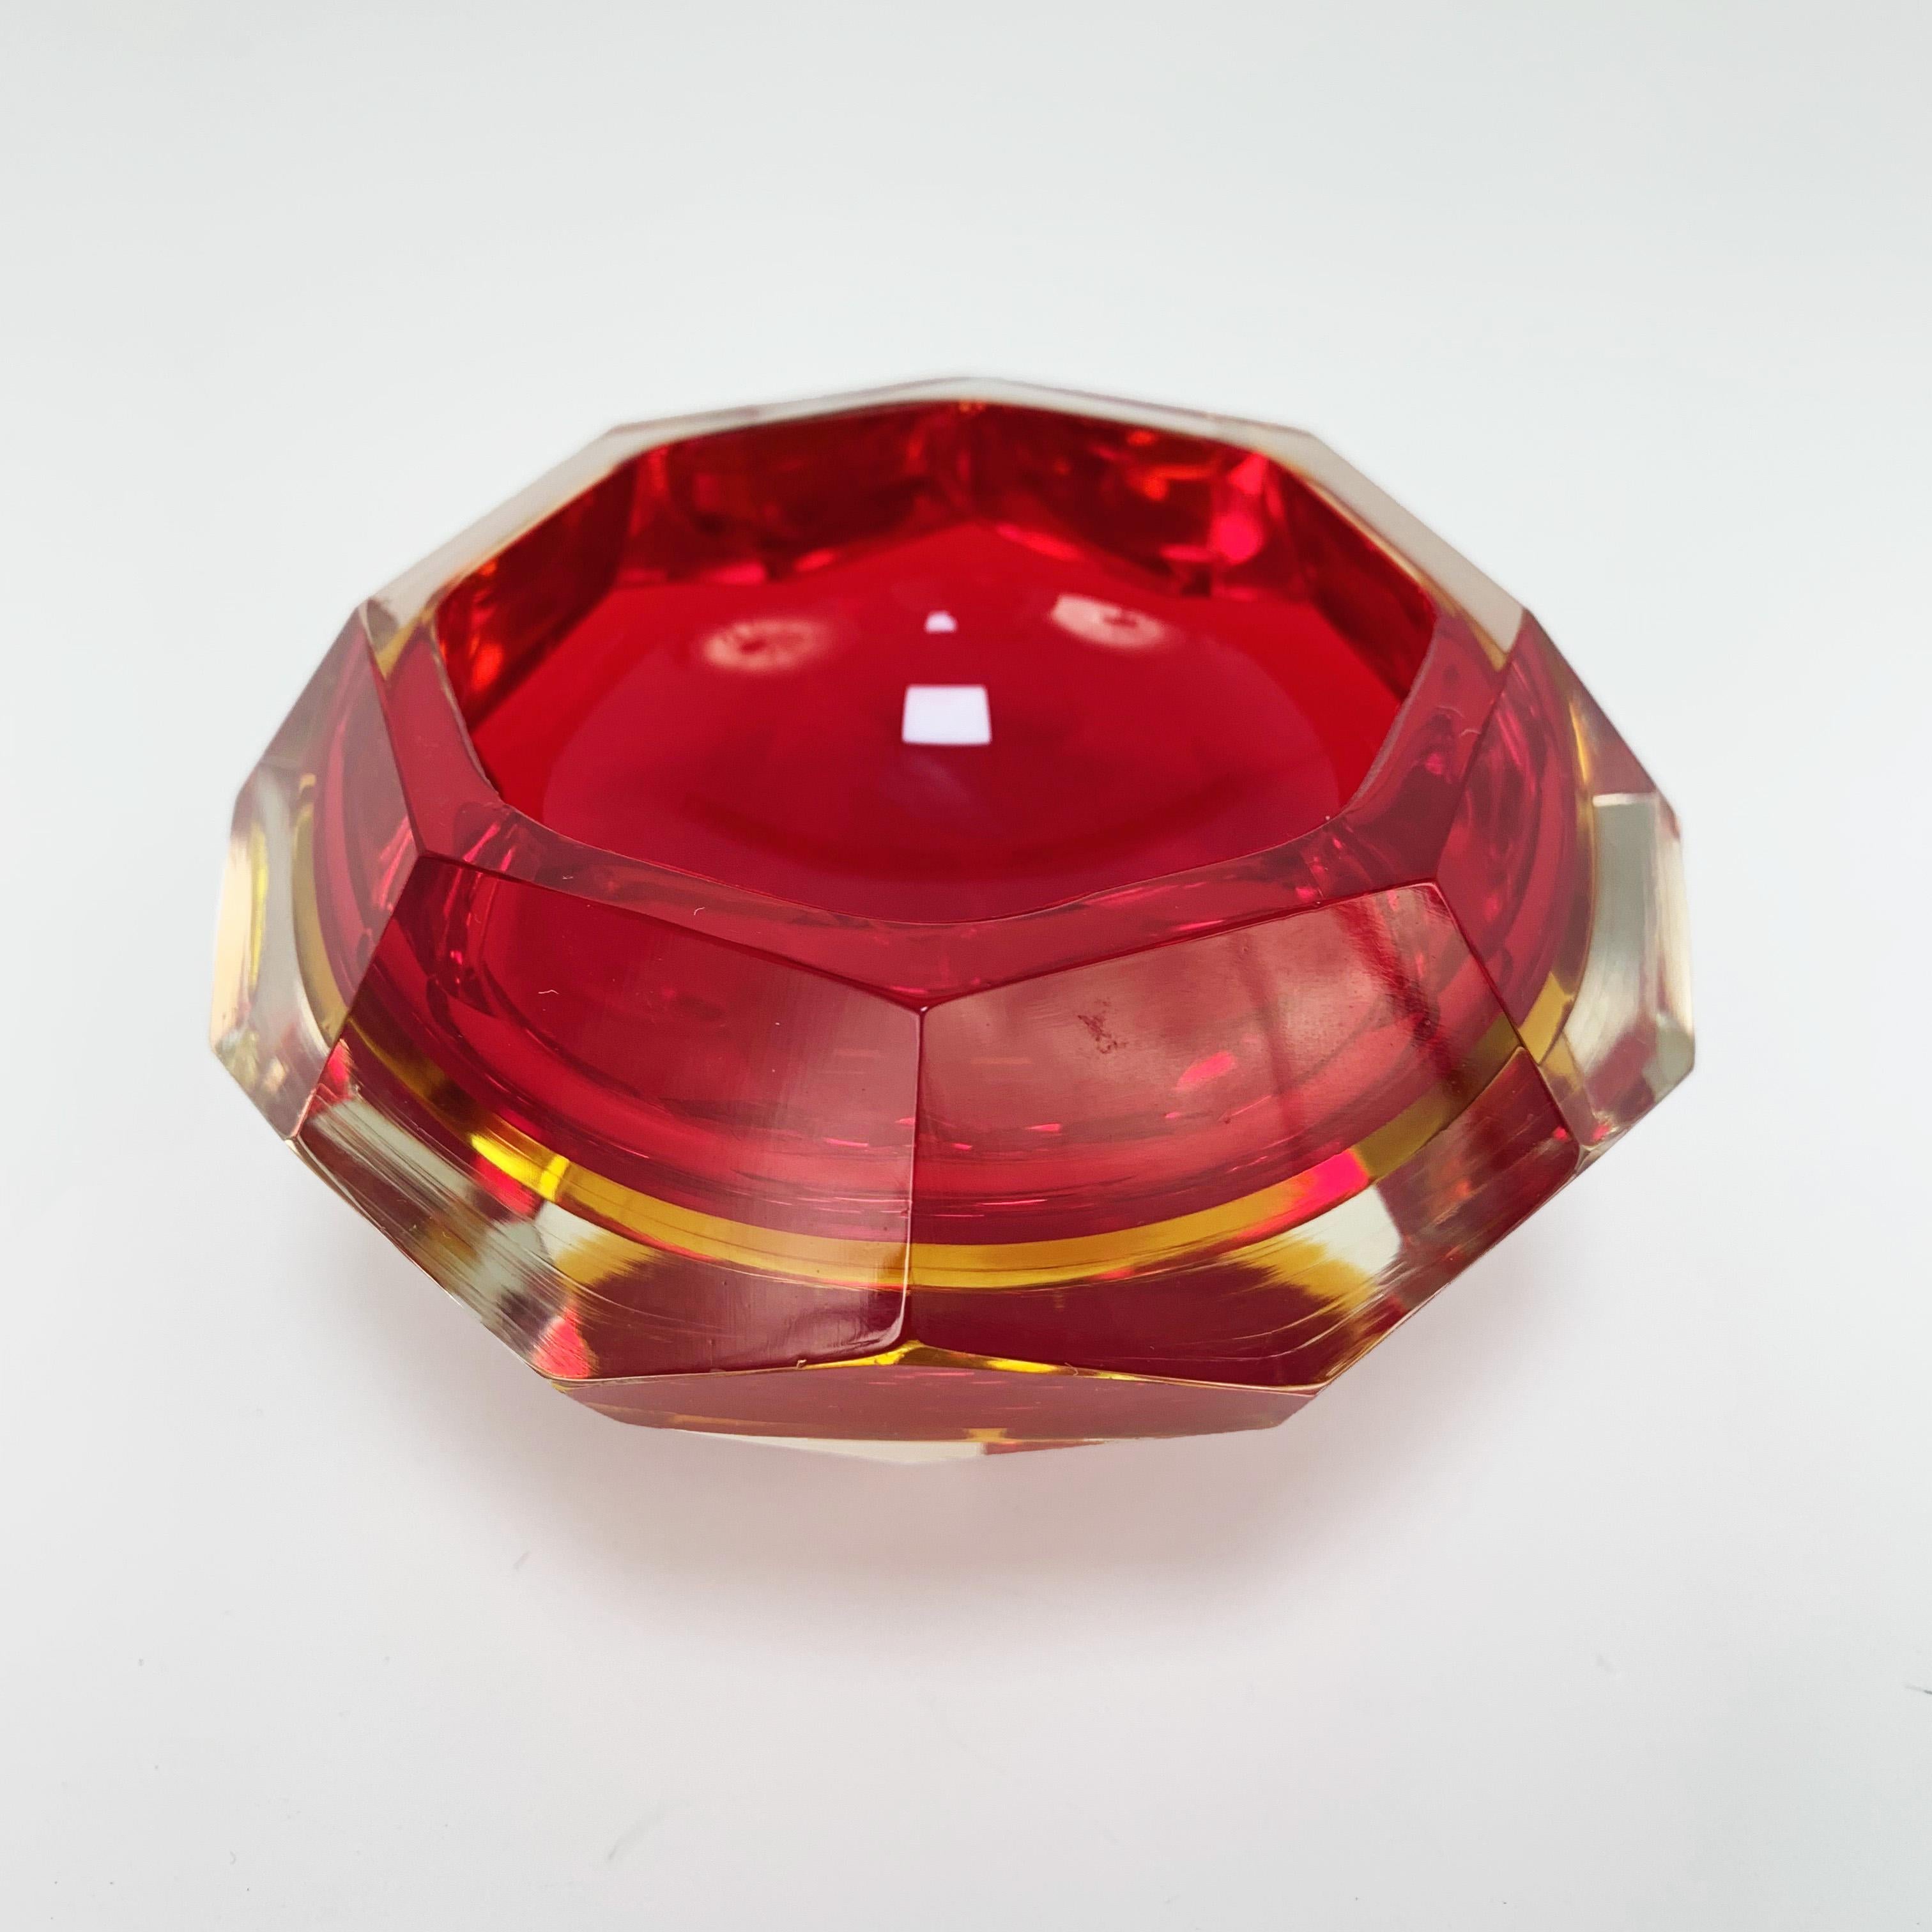 Murano ashtray, attributable to Flavio Poli, Vetro Sommerso. Red faceted glass, Italy, 1950s.

No chipping.